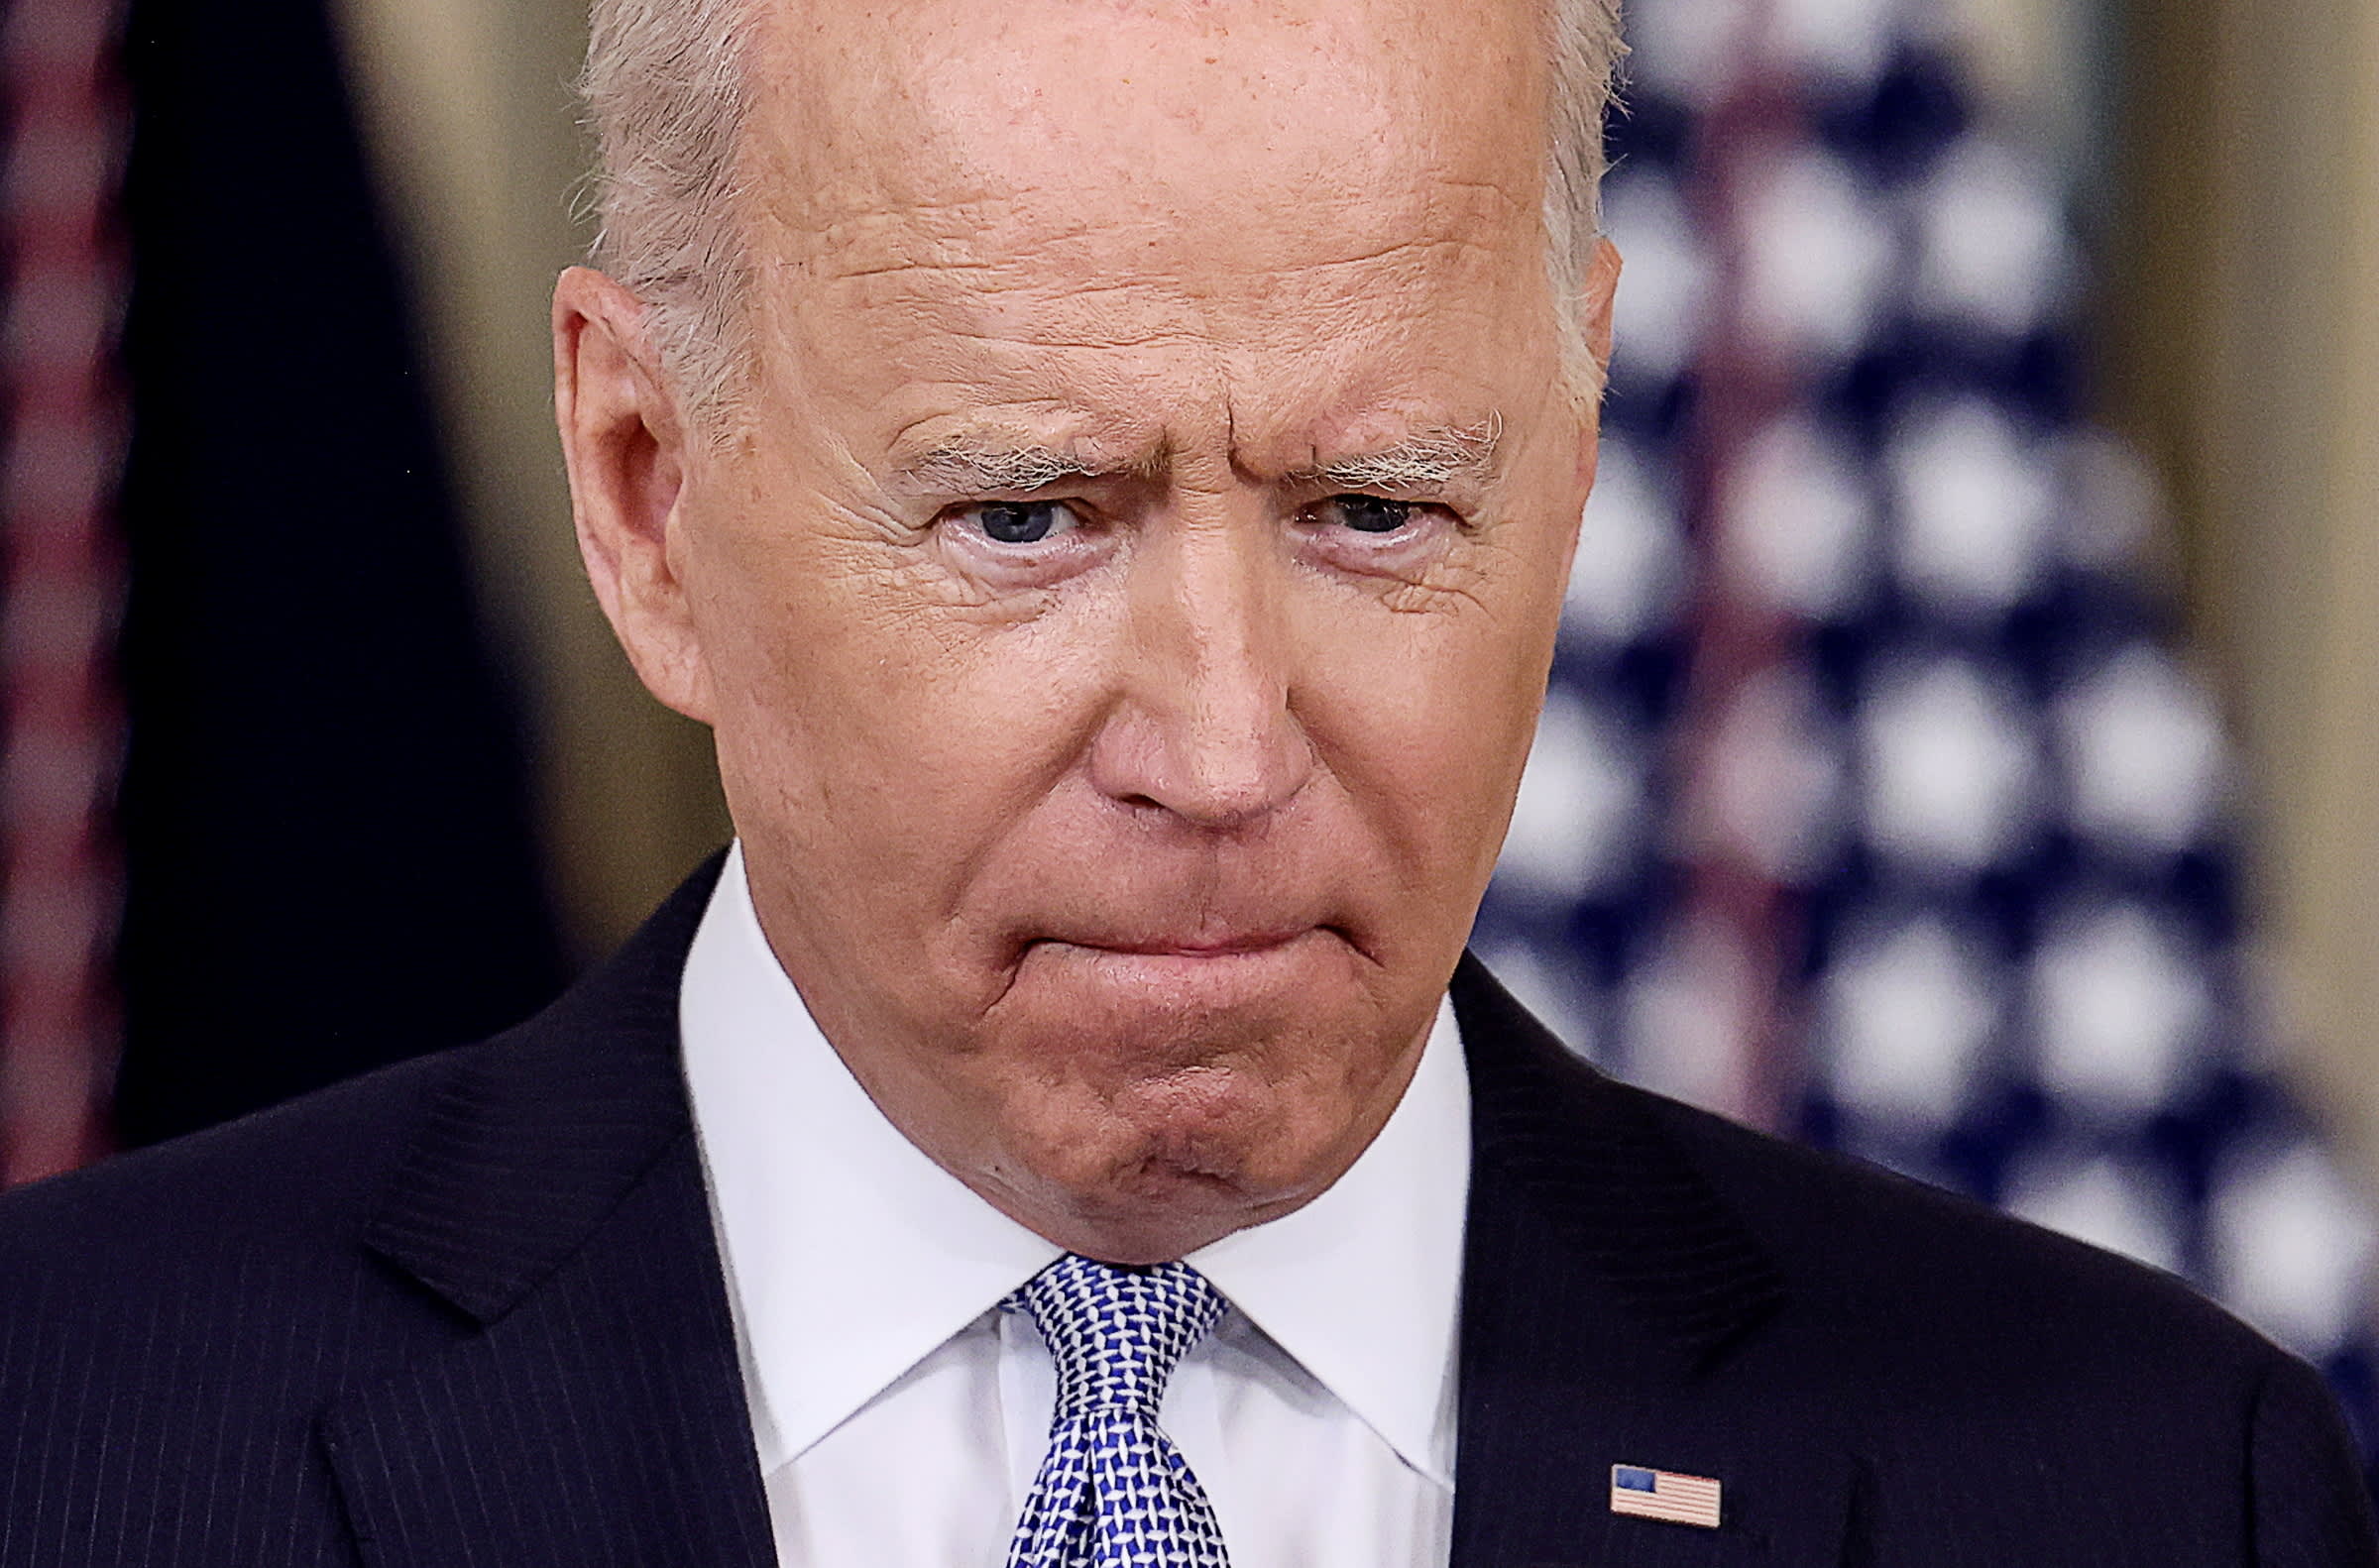 Op-ed: Biden needs to act now to shore up economic foreign policy to restore confidence in U.S. leadership